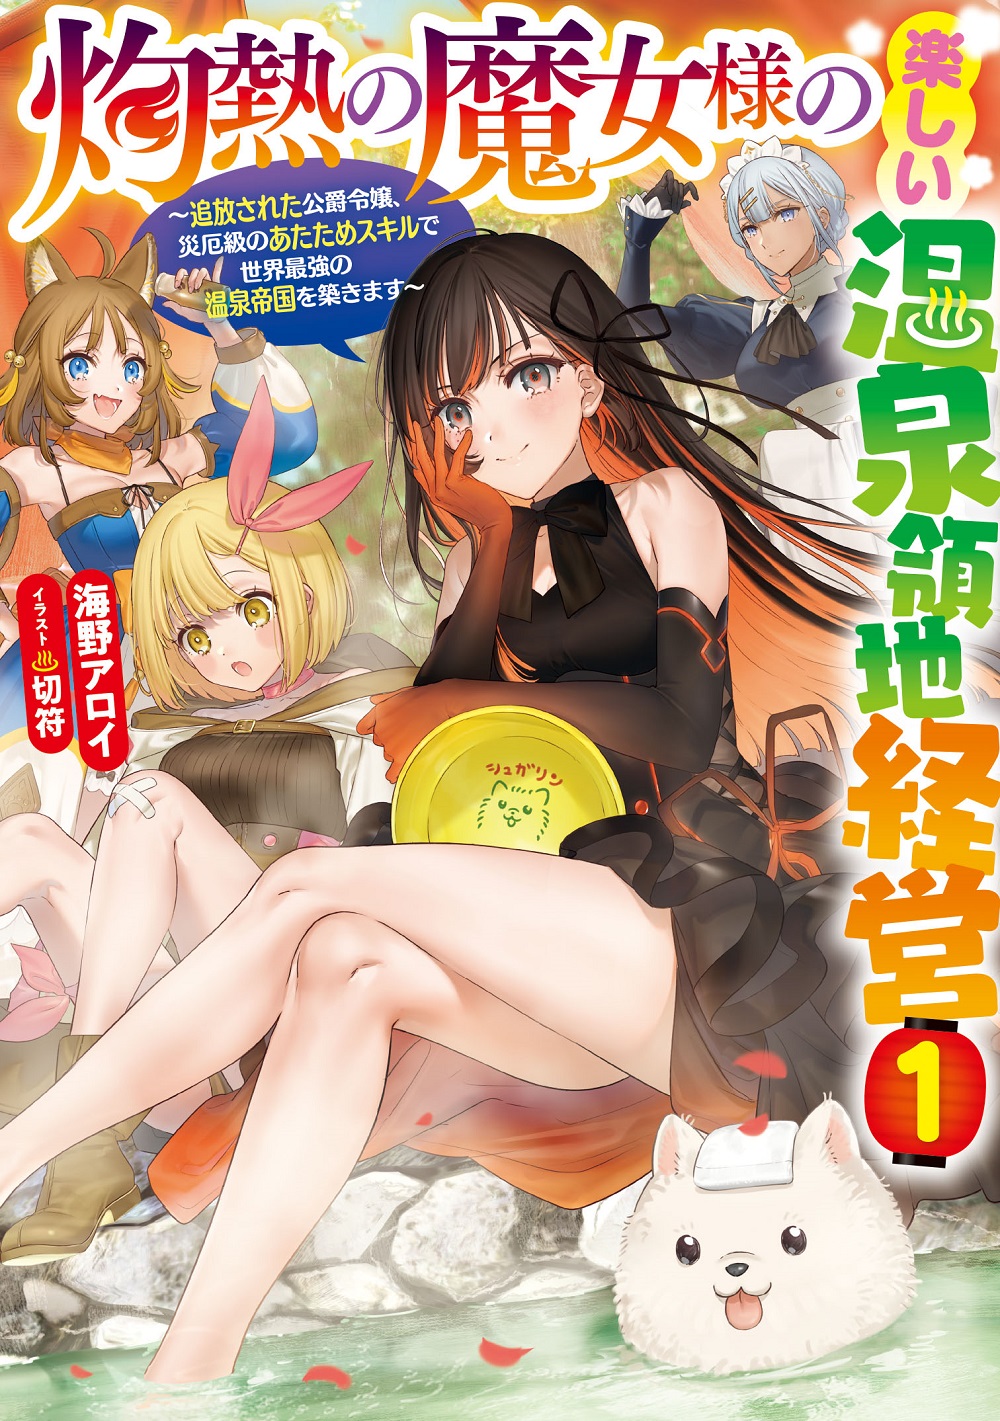 The Scorching Witch’s Fun Management of a Hot Spring Territory – The Exiled Duke’s Daughter Builds the World’s Strongest Hot Spring Empire with Her Disaster-Class Warming Skills (WN)